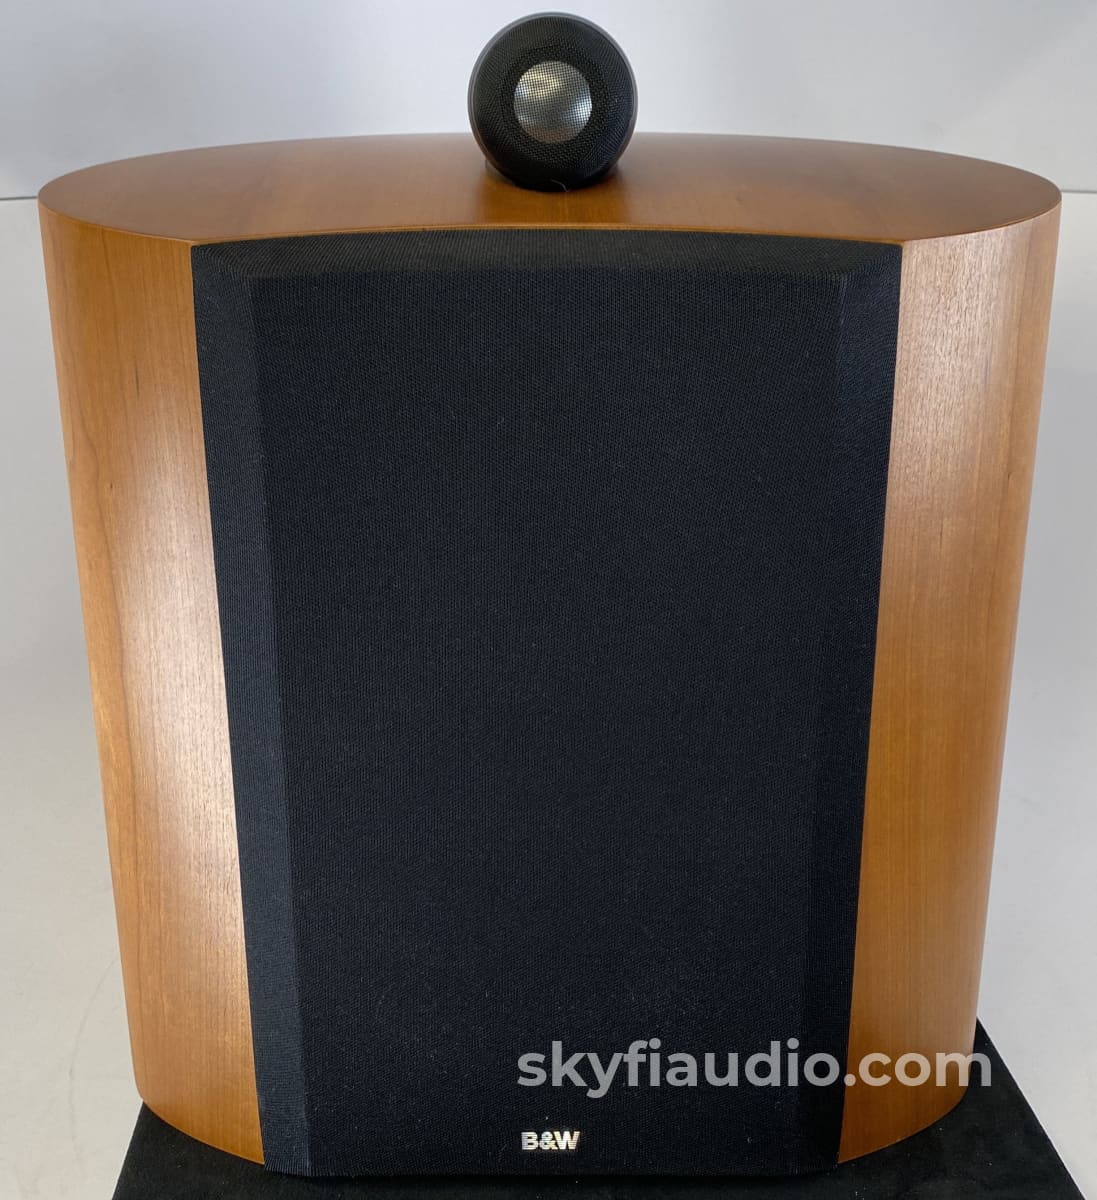 B&W (Bowers & Wilkins) Nautilus Scm1 Home Theater Speakers In Cherry